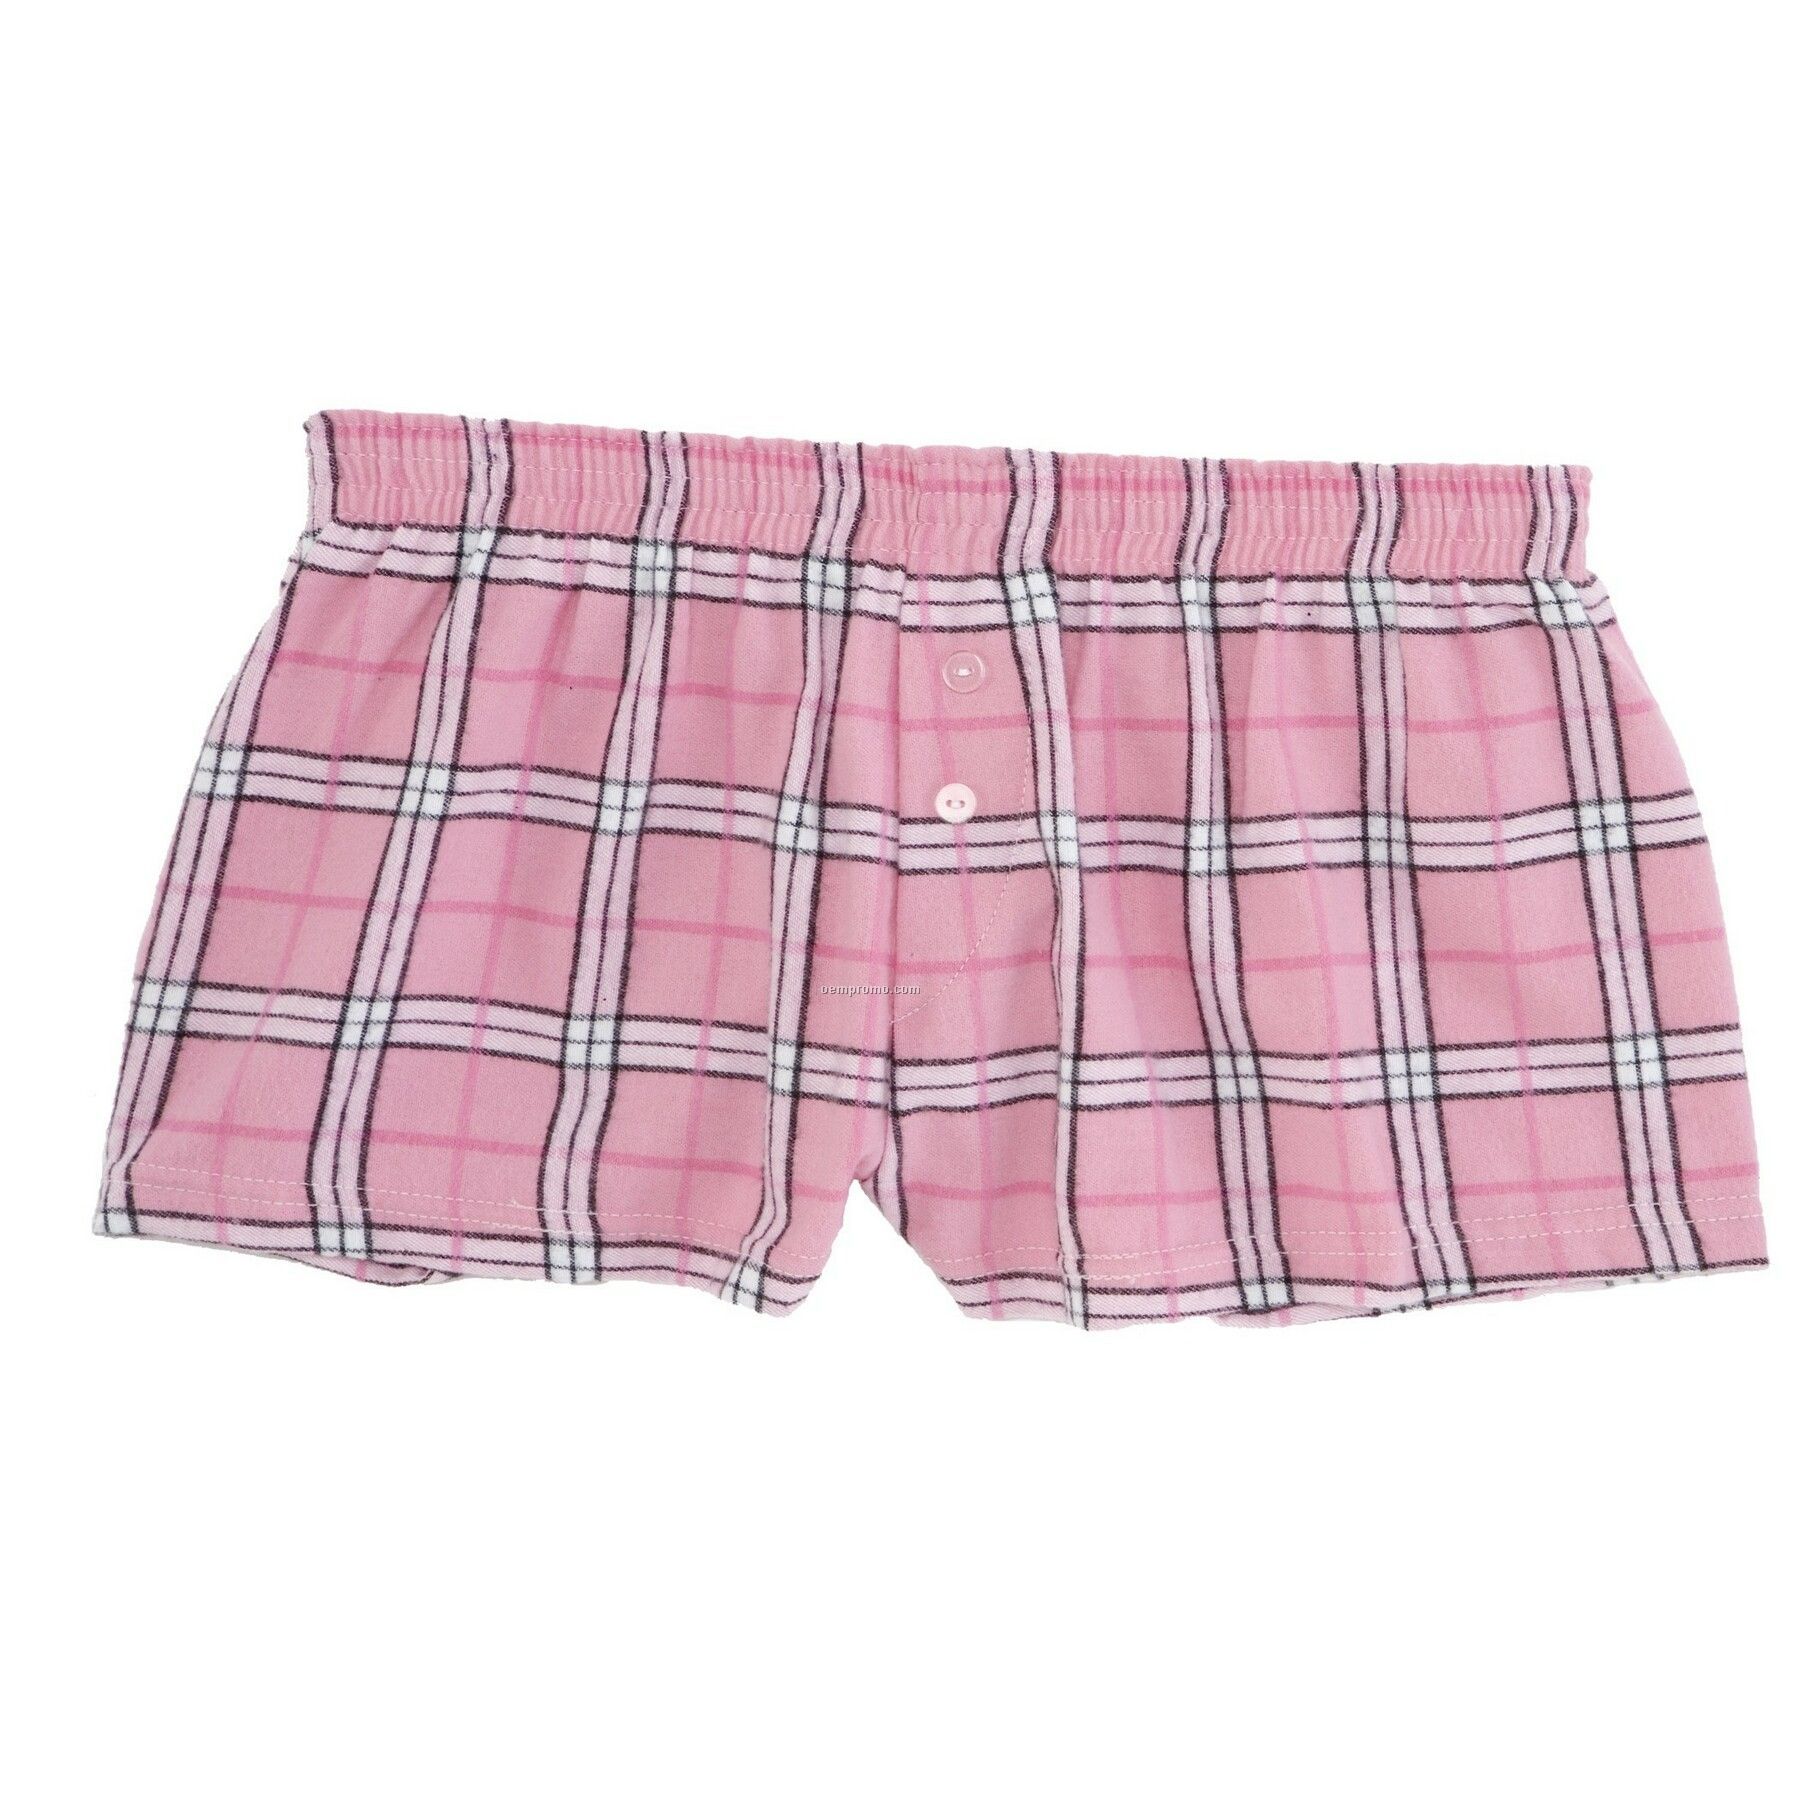 Ladies' Pink/Black Flannel Bitty Boxer Short W/ False Fly